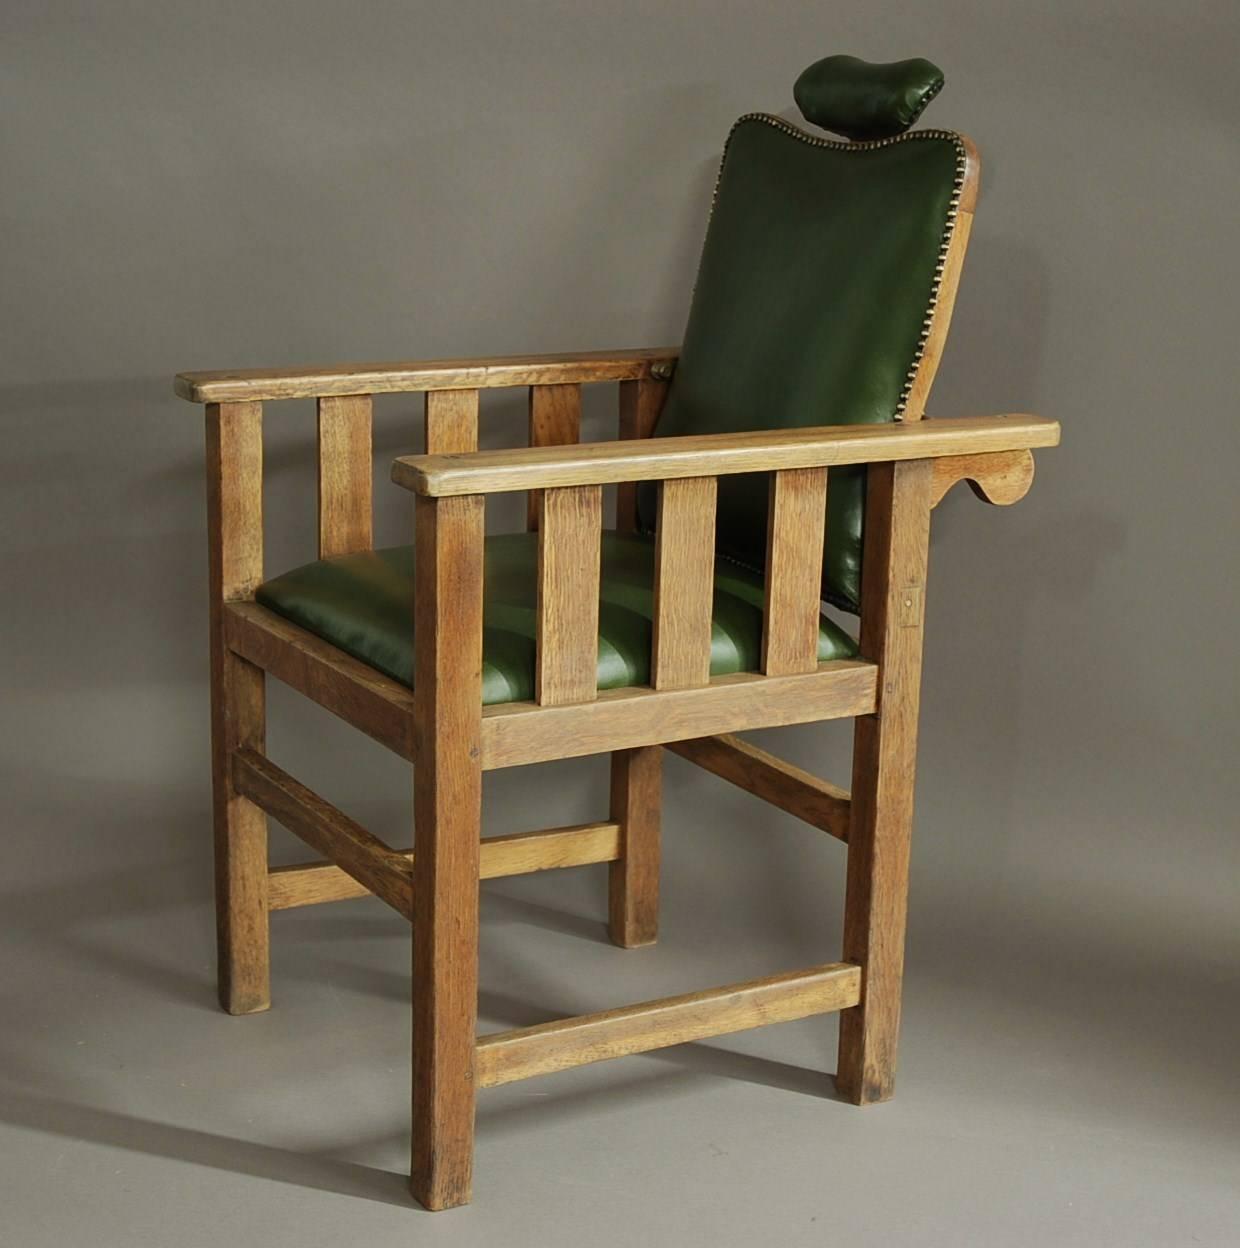 An early 20th century Arts & Crafts oak barber's chair with leather upholstery.

This chair consists of an oak frame of typical Arts & Crafts design with wooden slats to the sides.

The back and headrest are both adjustable and the green